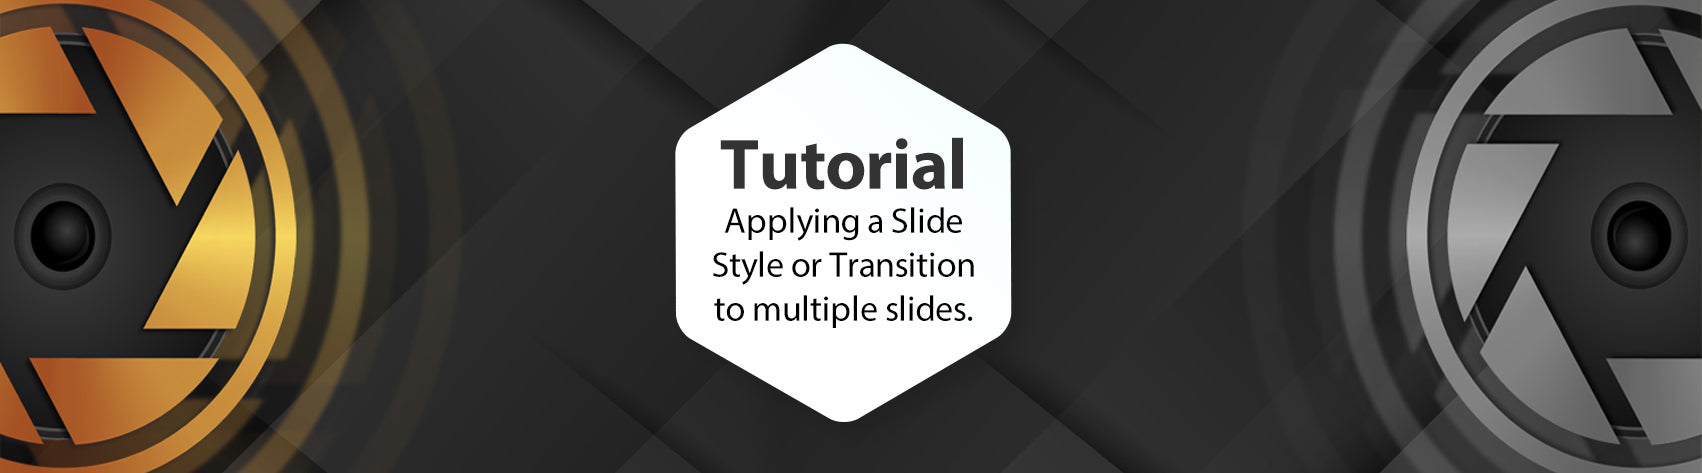 Tutorial - Applying a Slide Style or Transition to Multiple Slides